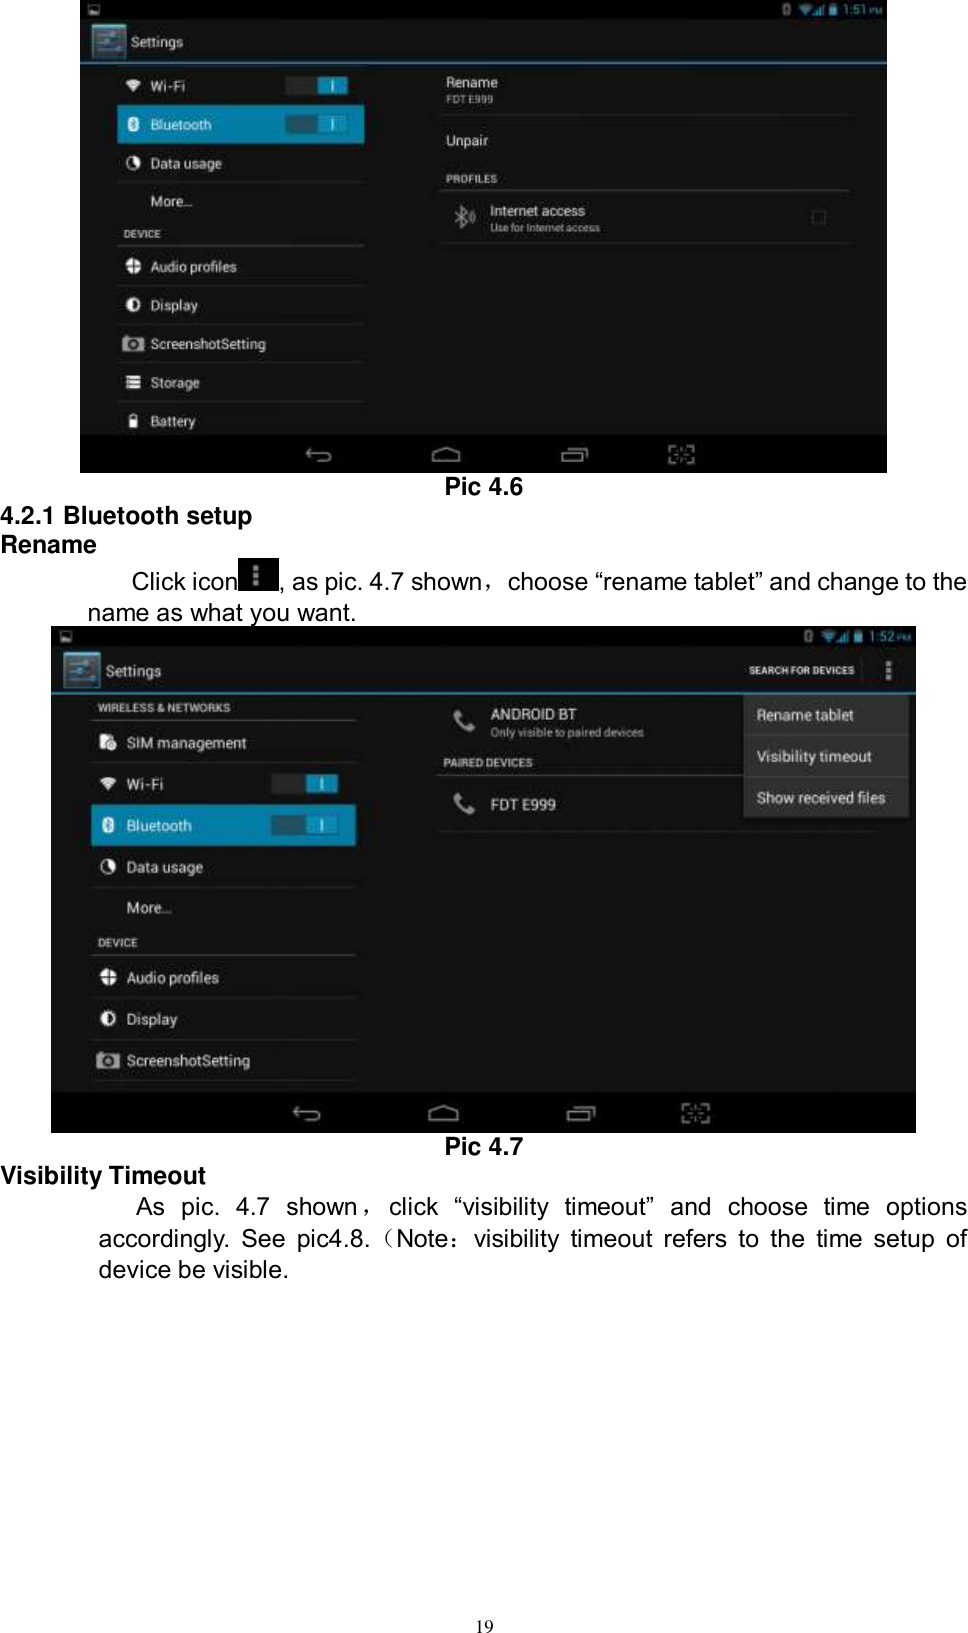      19  Pic 4.6 4.2.1 Bluetooth setup Rename Click icon , as pic. 4.7 shown，choose “rename tablet” and change to the name as what you want.    Pic 4.7 Visibility Timeout As  pic.  4.7  shown，click  “visibility  timeout”  and  choose  time  options accordingly. See  pic4.8.（Note：visibility  timeout  refers to  the  time  setup  of device be visible.   